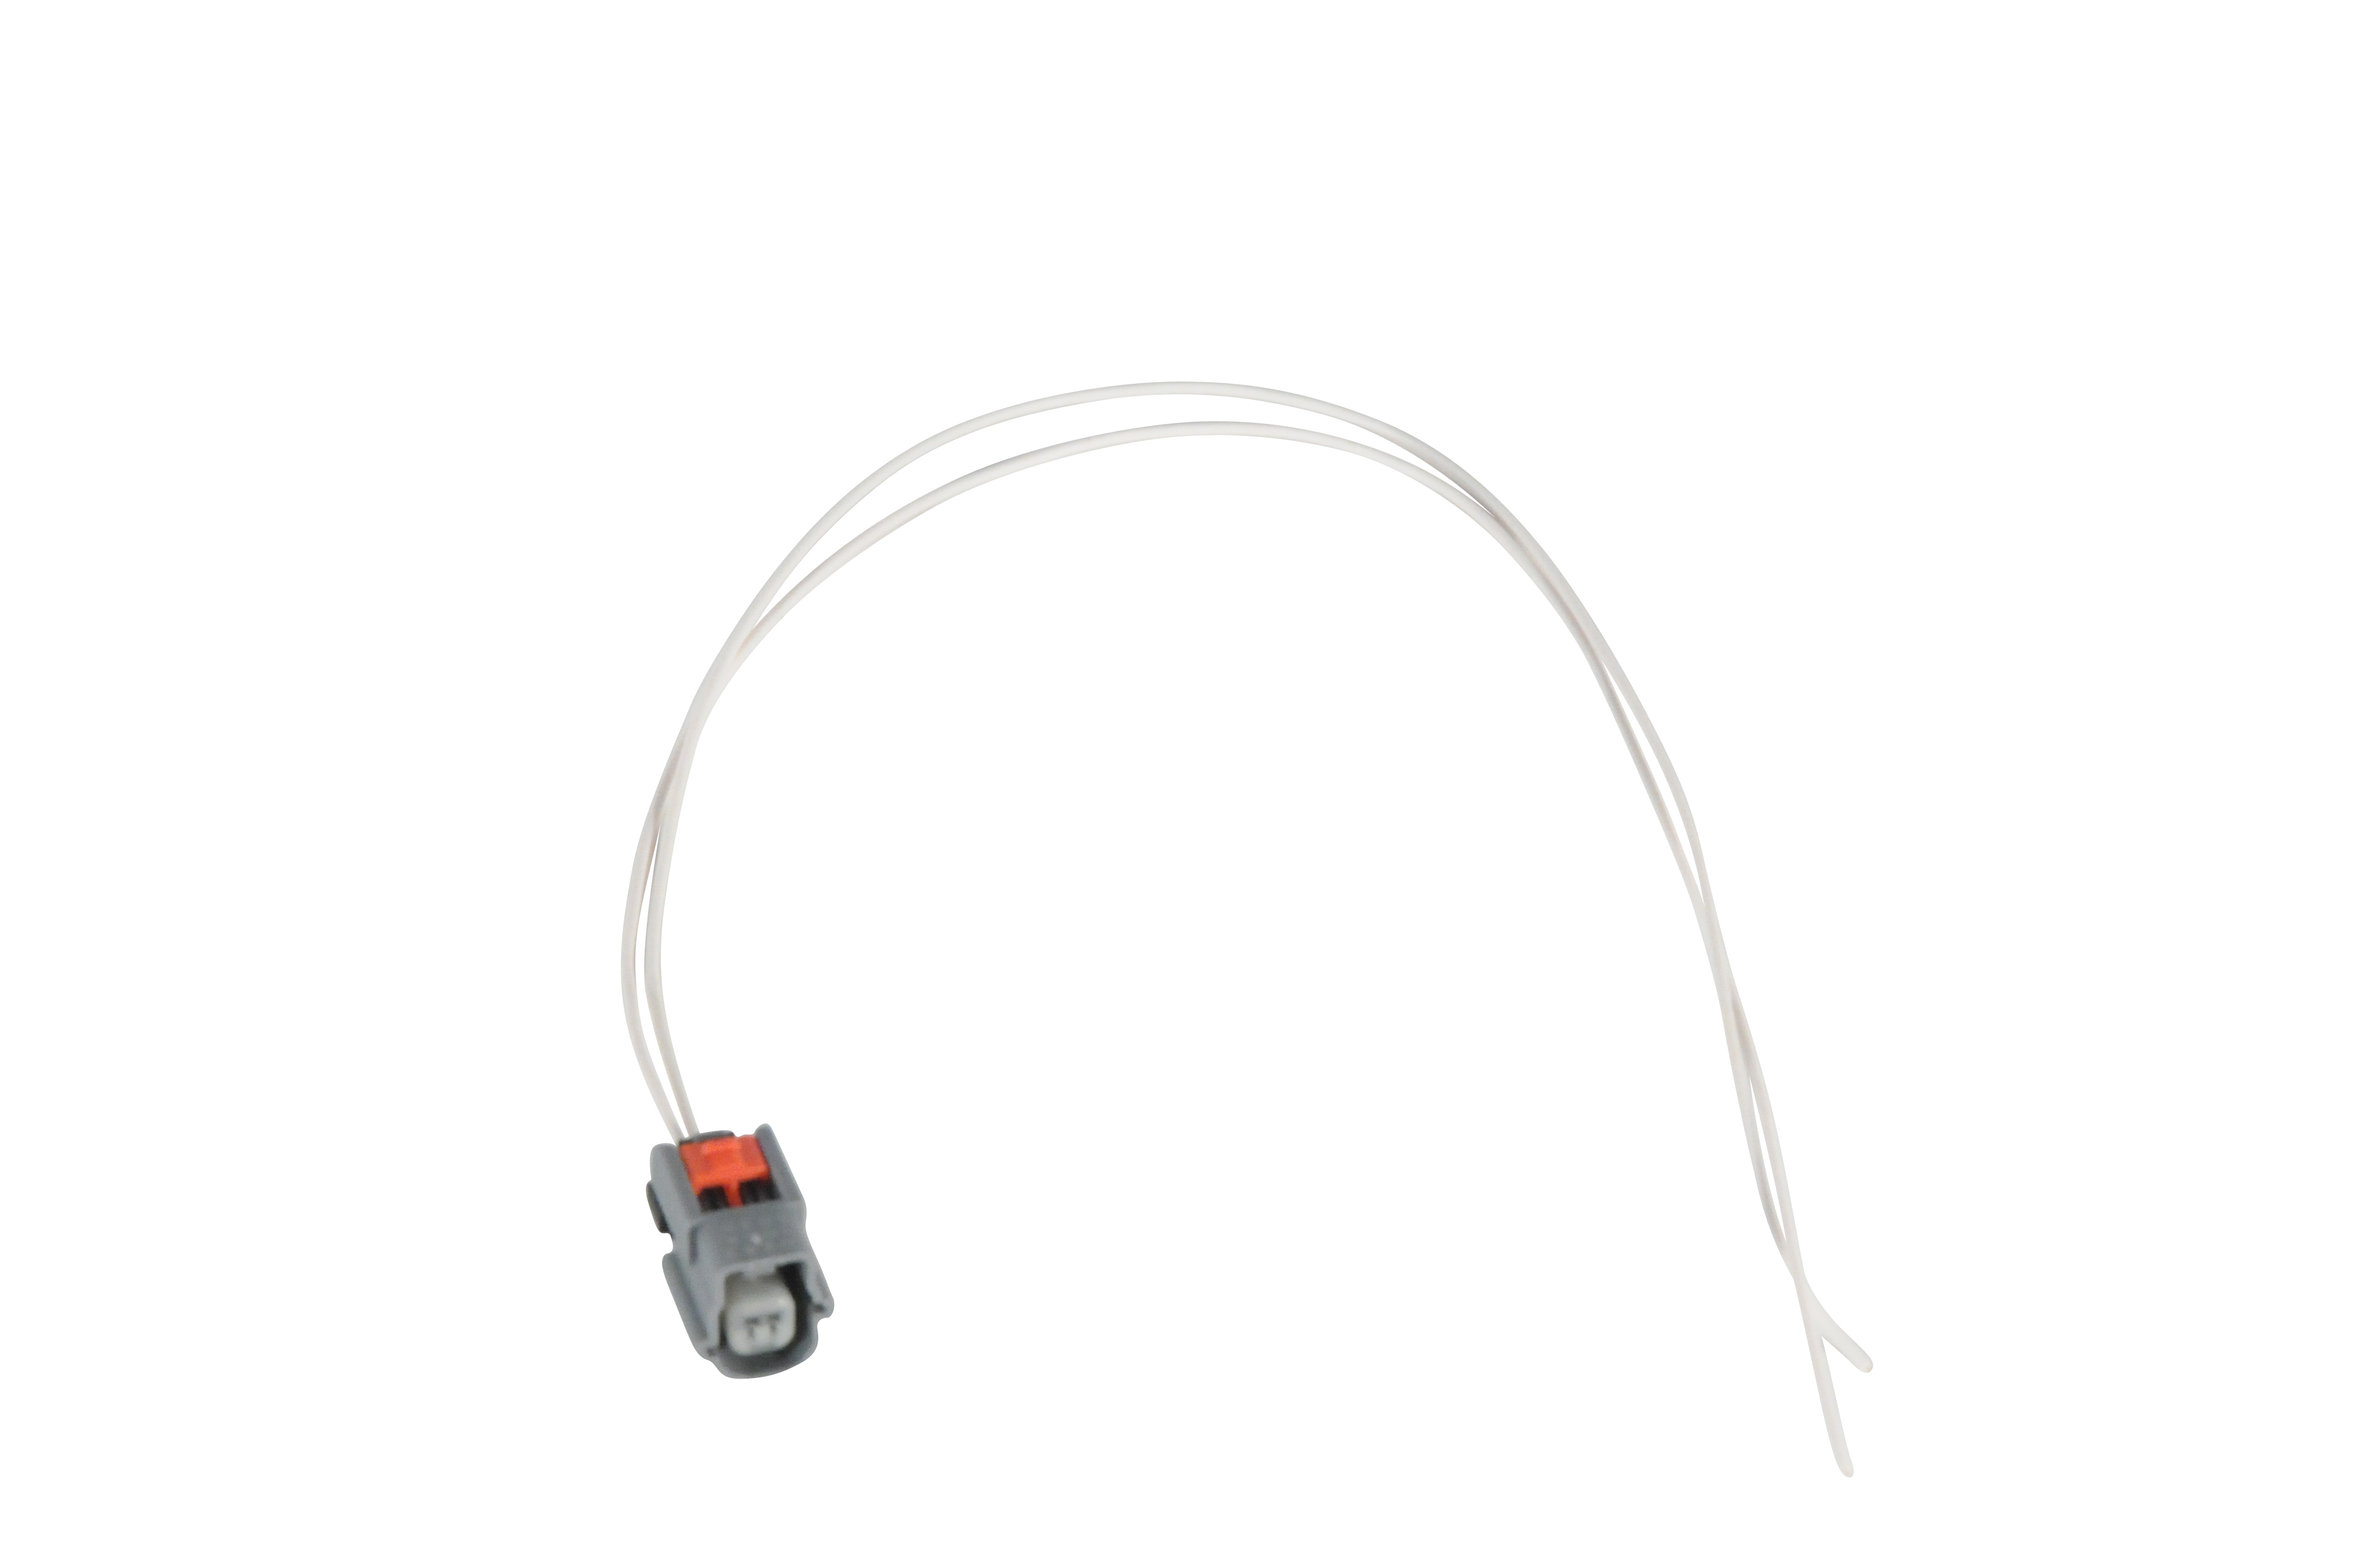 GM GENUINE PARTS CANADA - Body Wiring Harness Connector - GMC PT2792